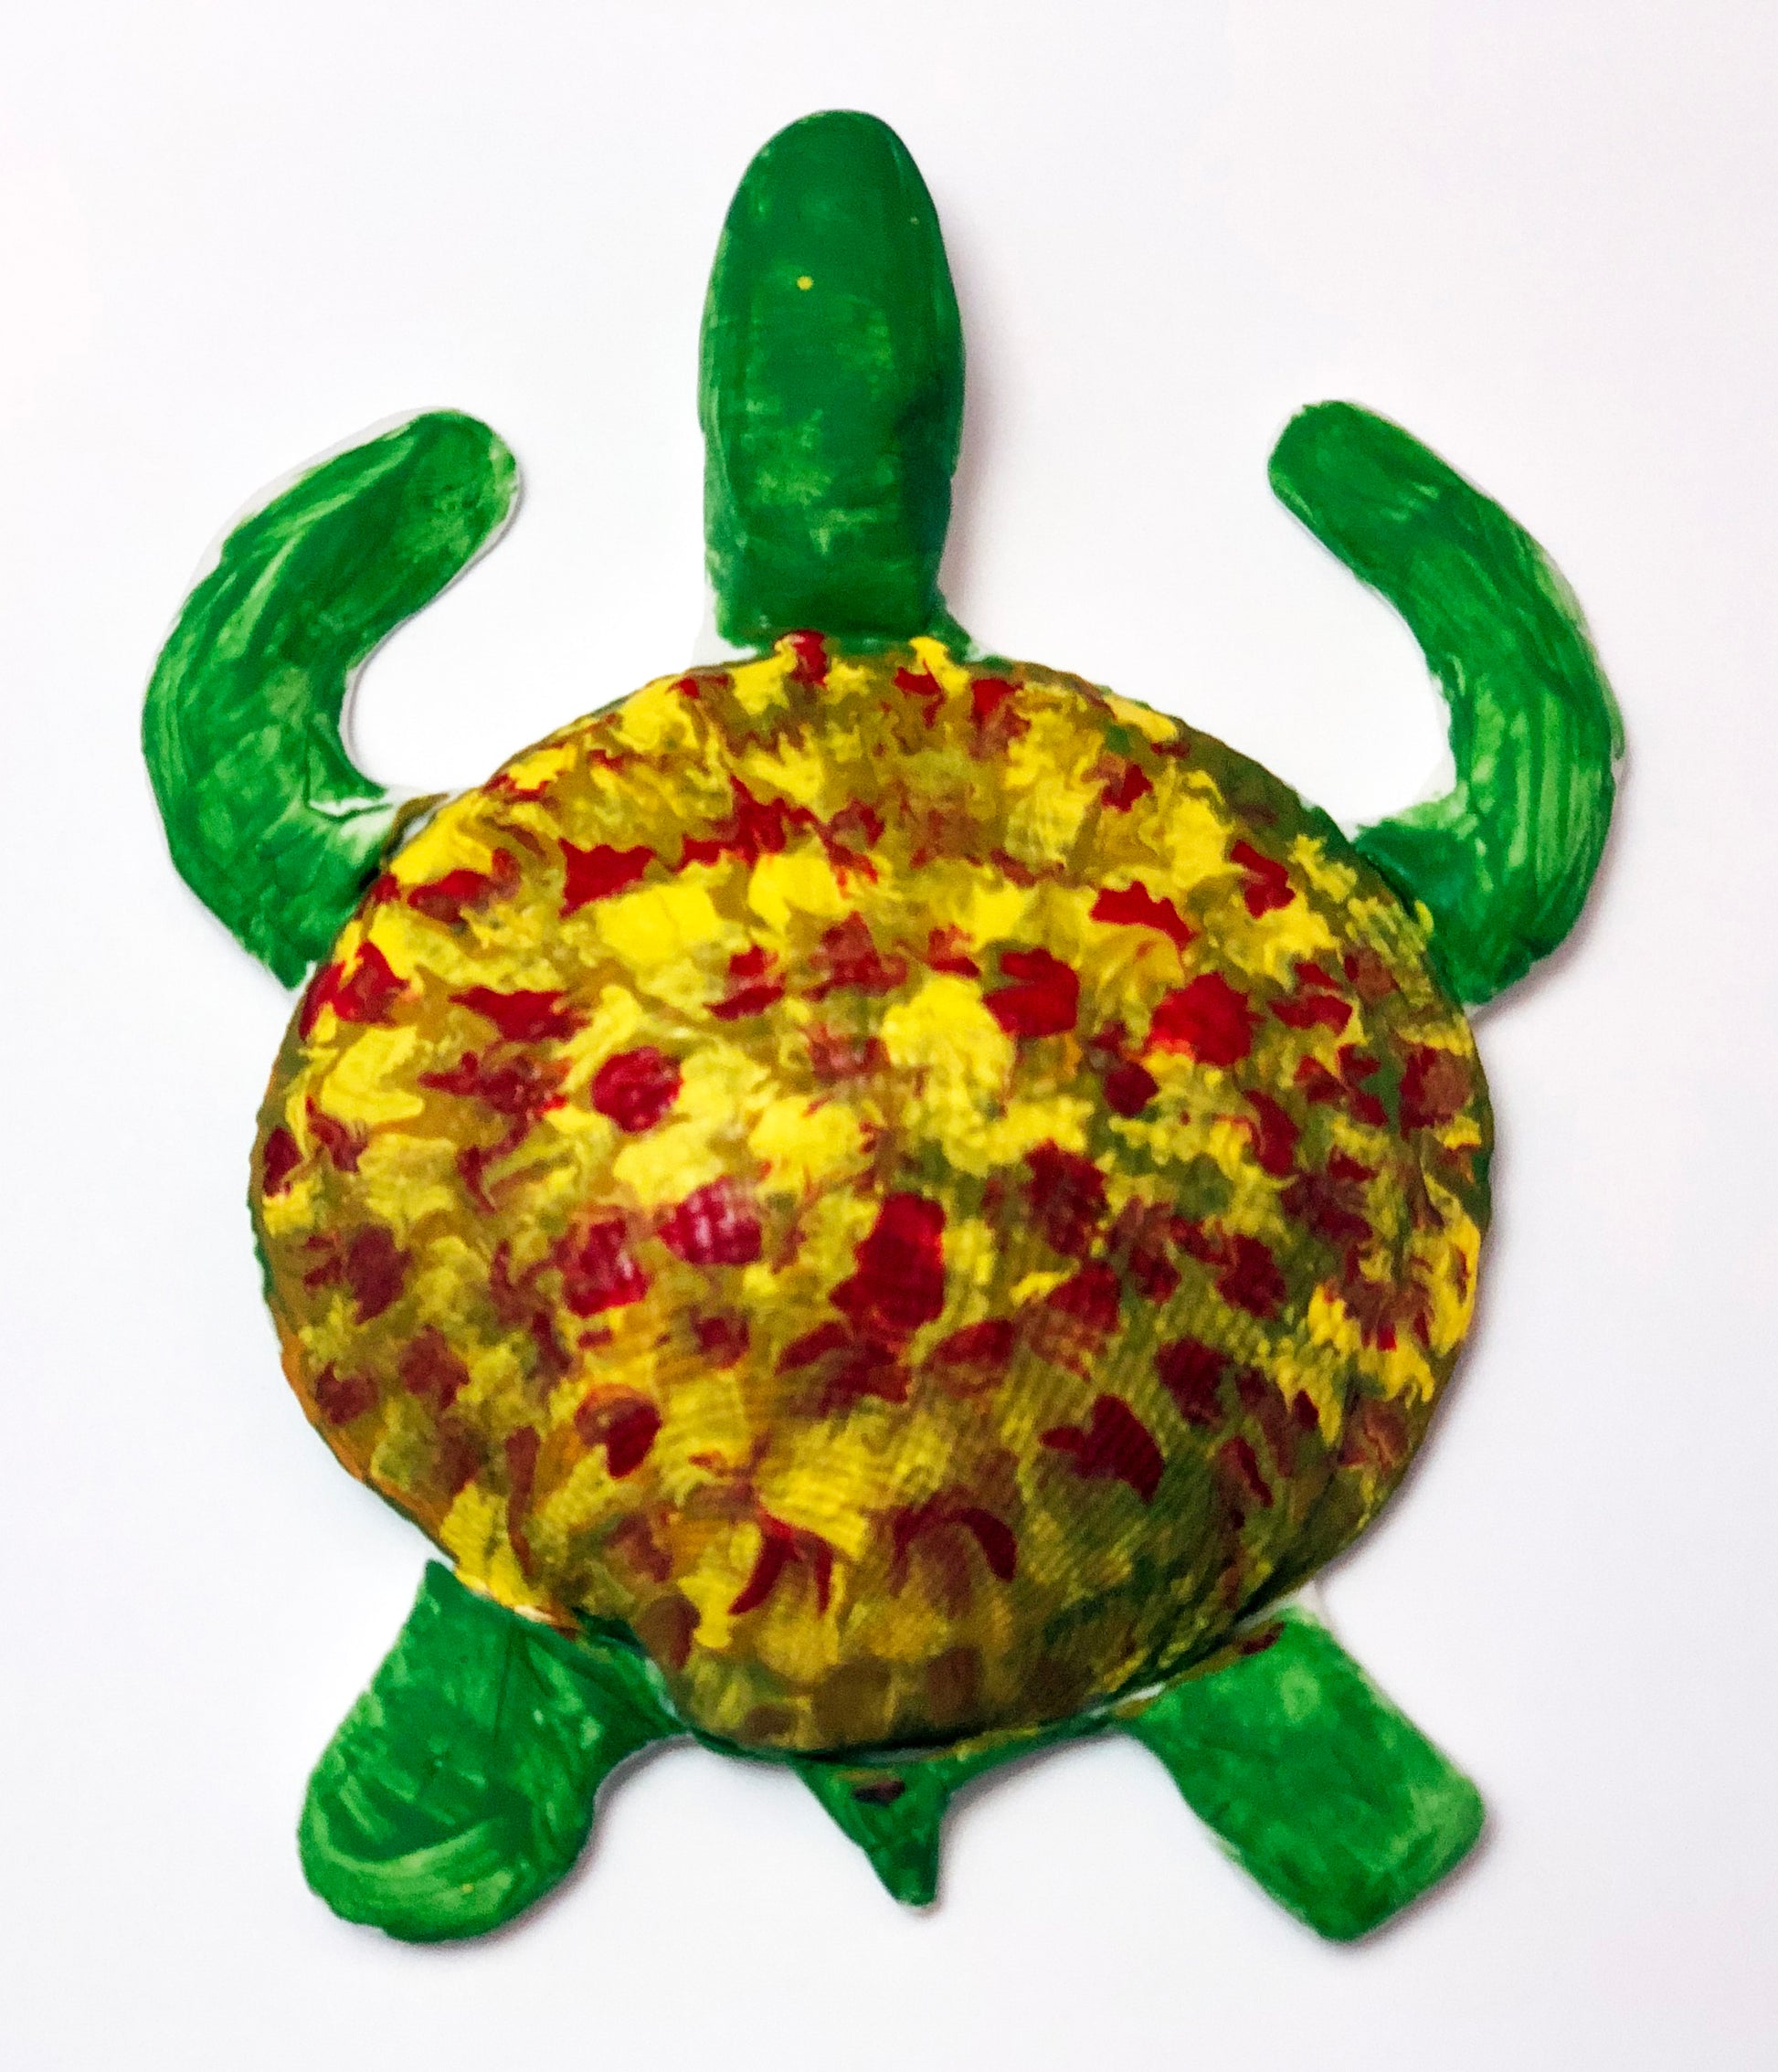 Green sea turtle clay model children's art and science activity